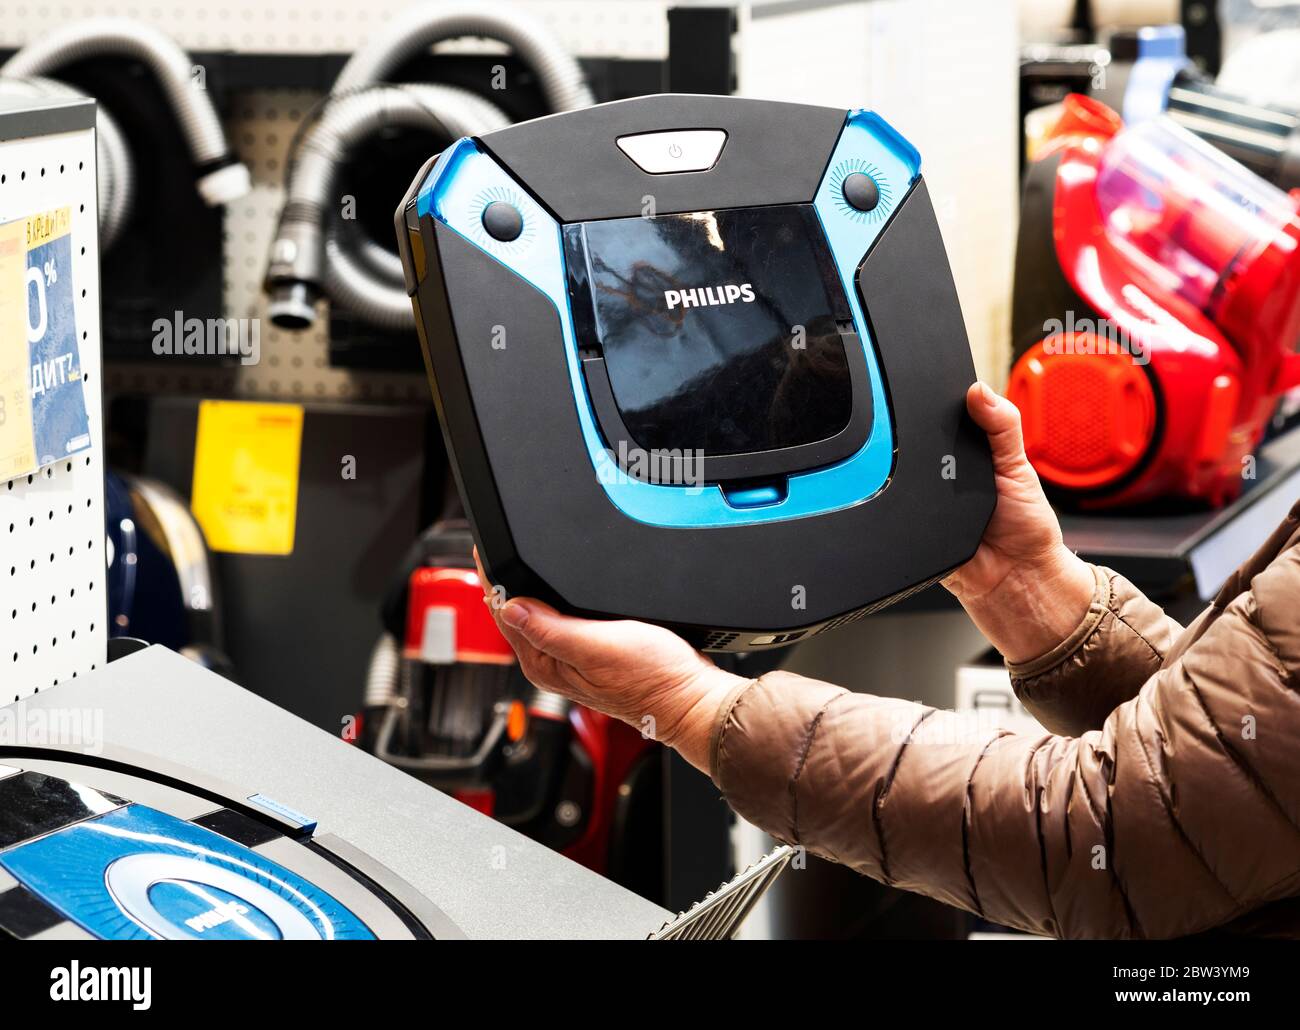 A woman holds a Philips robot vacuum cleaners in store Stock Photo - Alamy